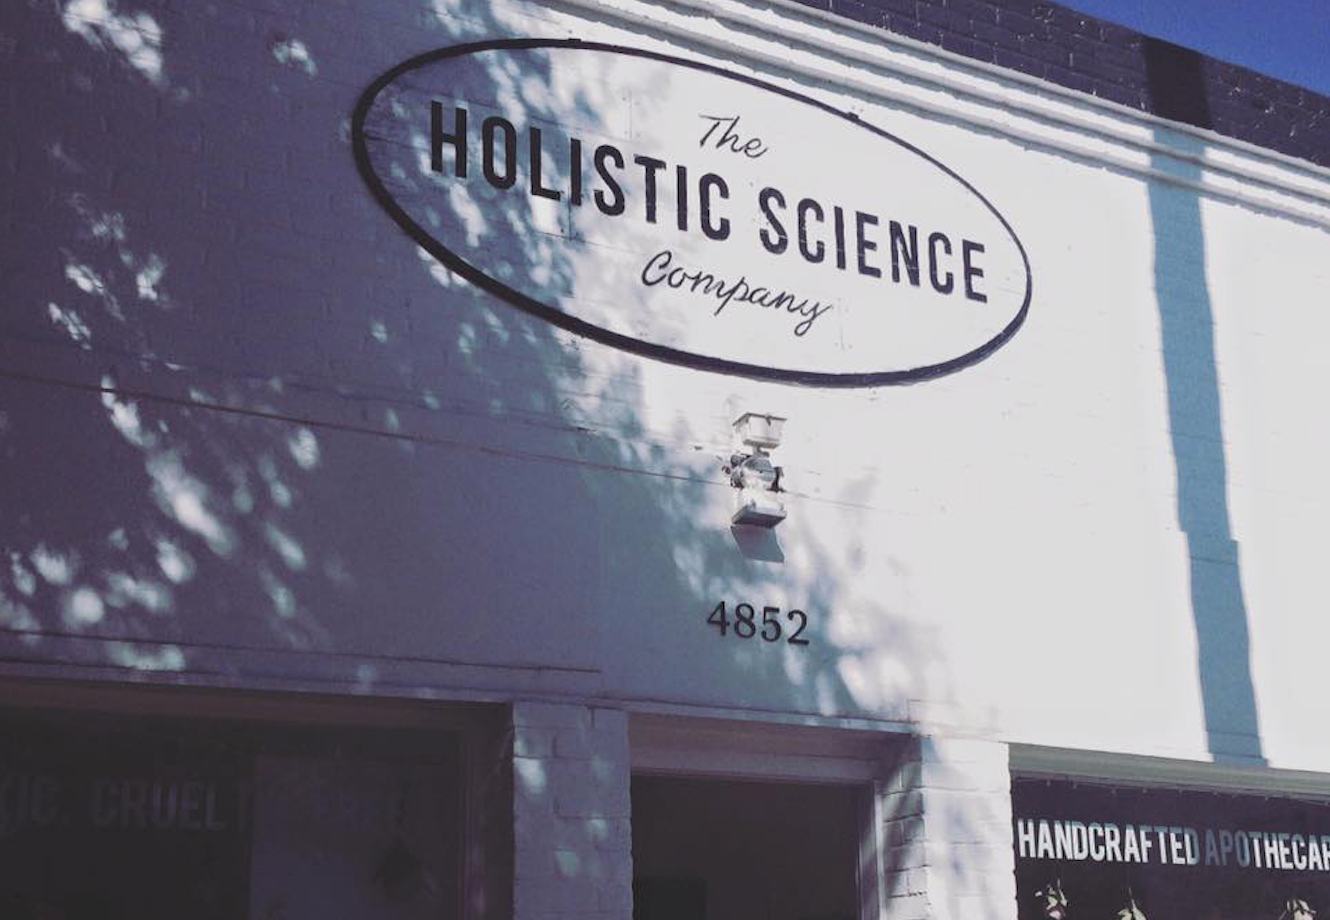 8 West Soap Now Available at The Holistic Science Company in Ocean Beach